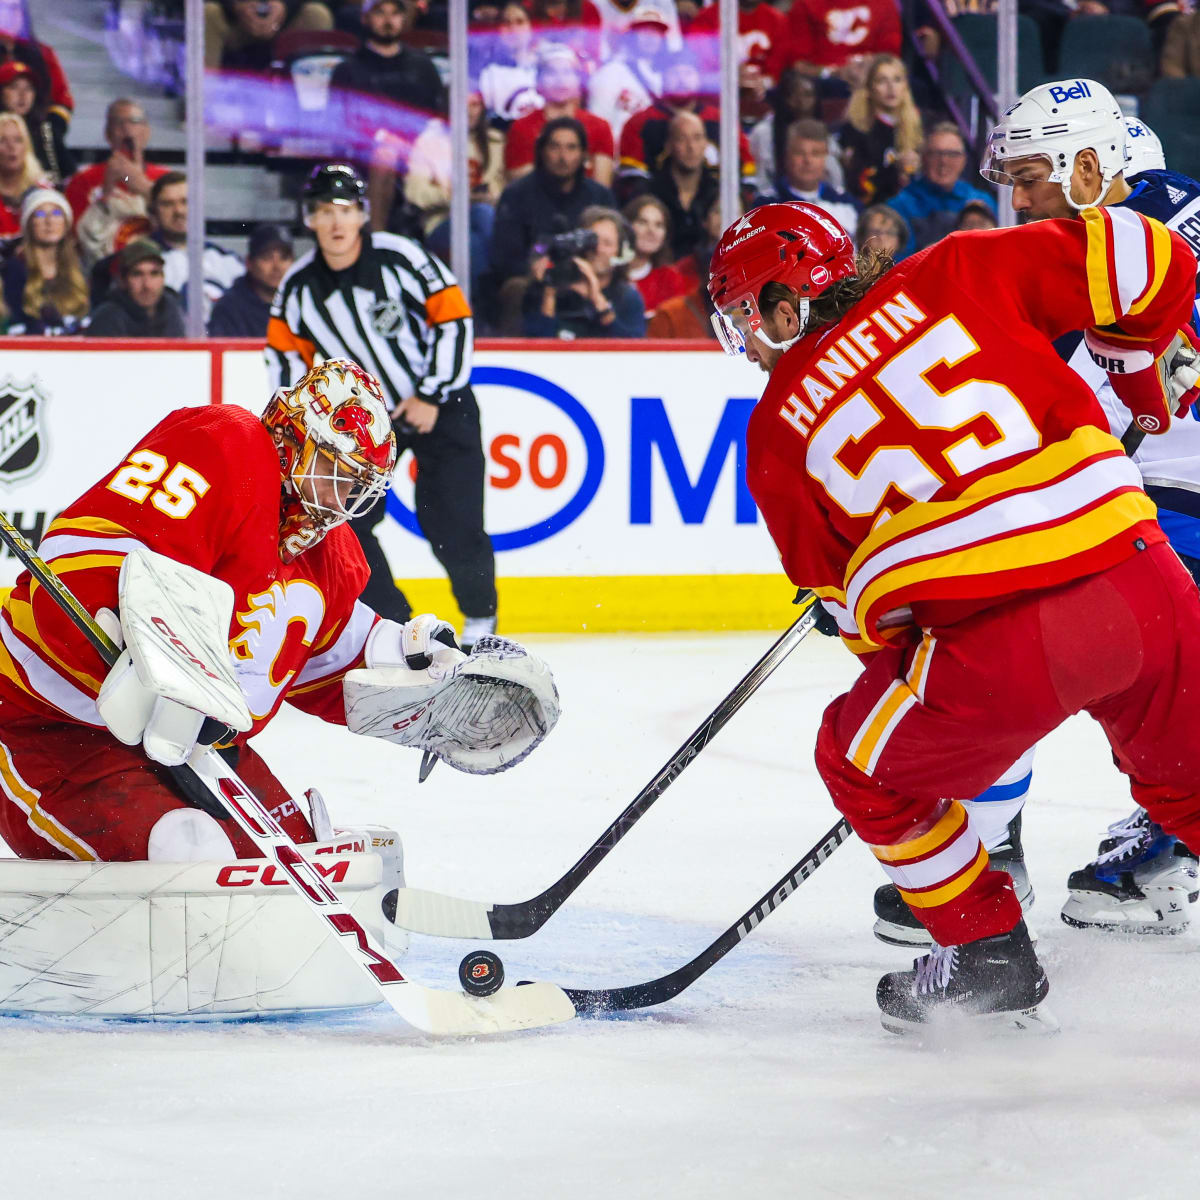 GAMEDAY: Jets at Flames